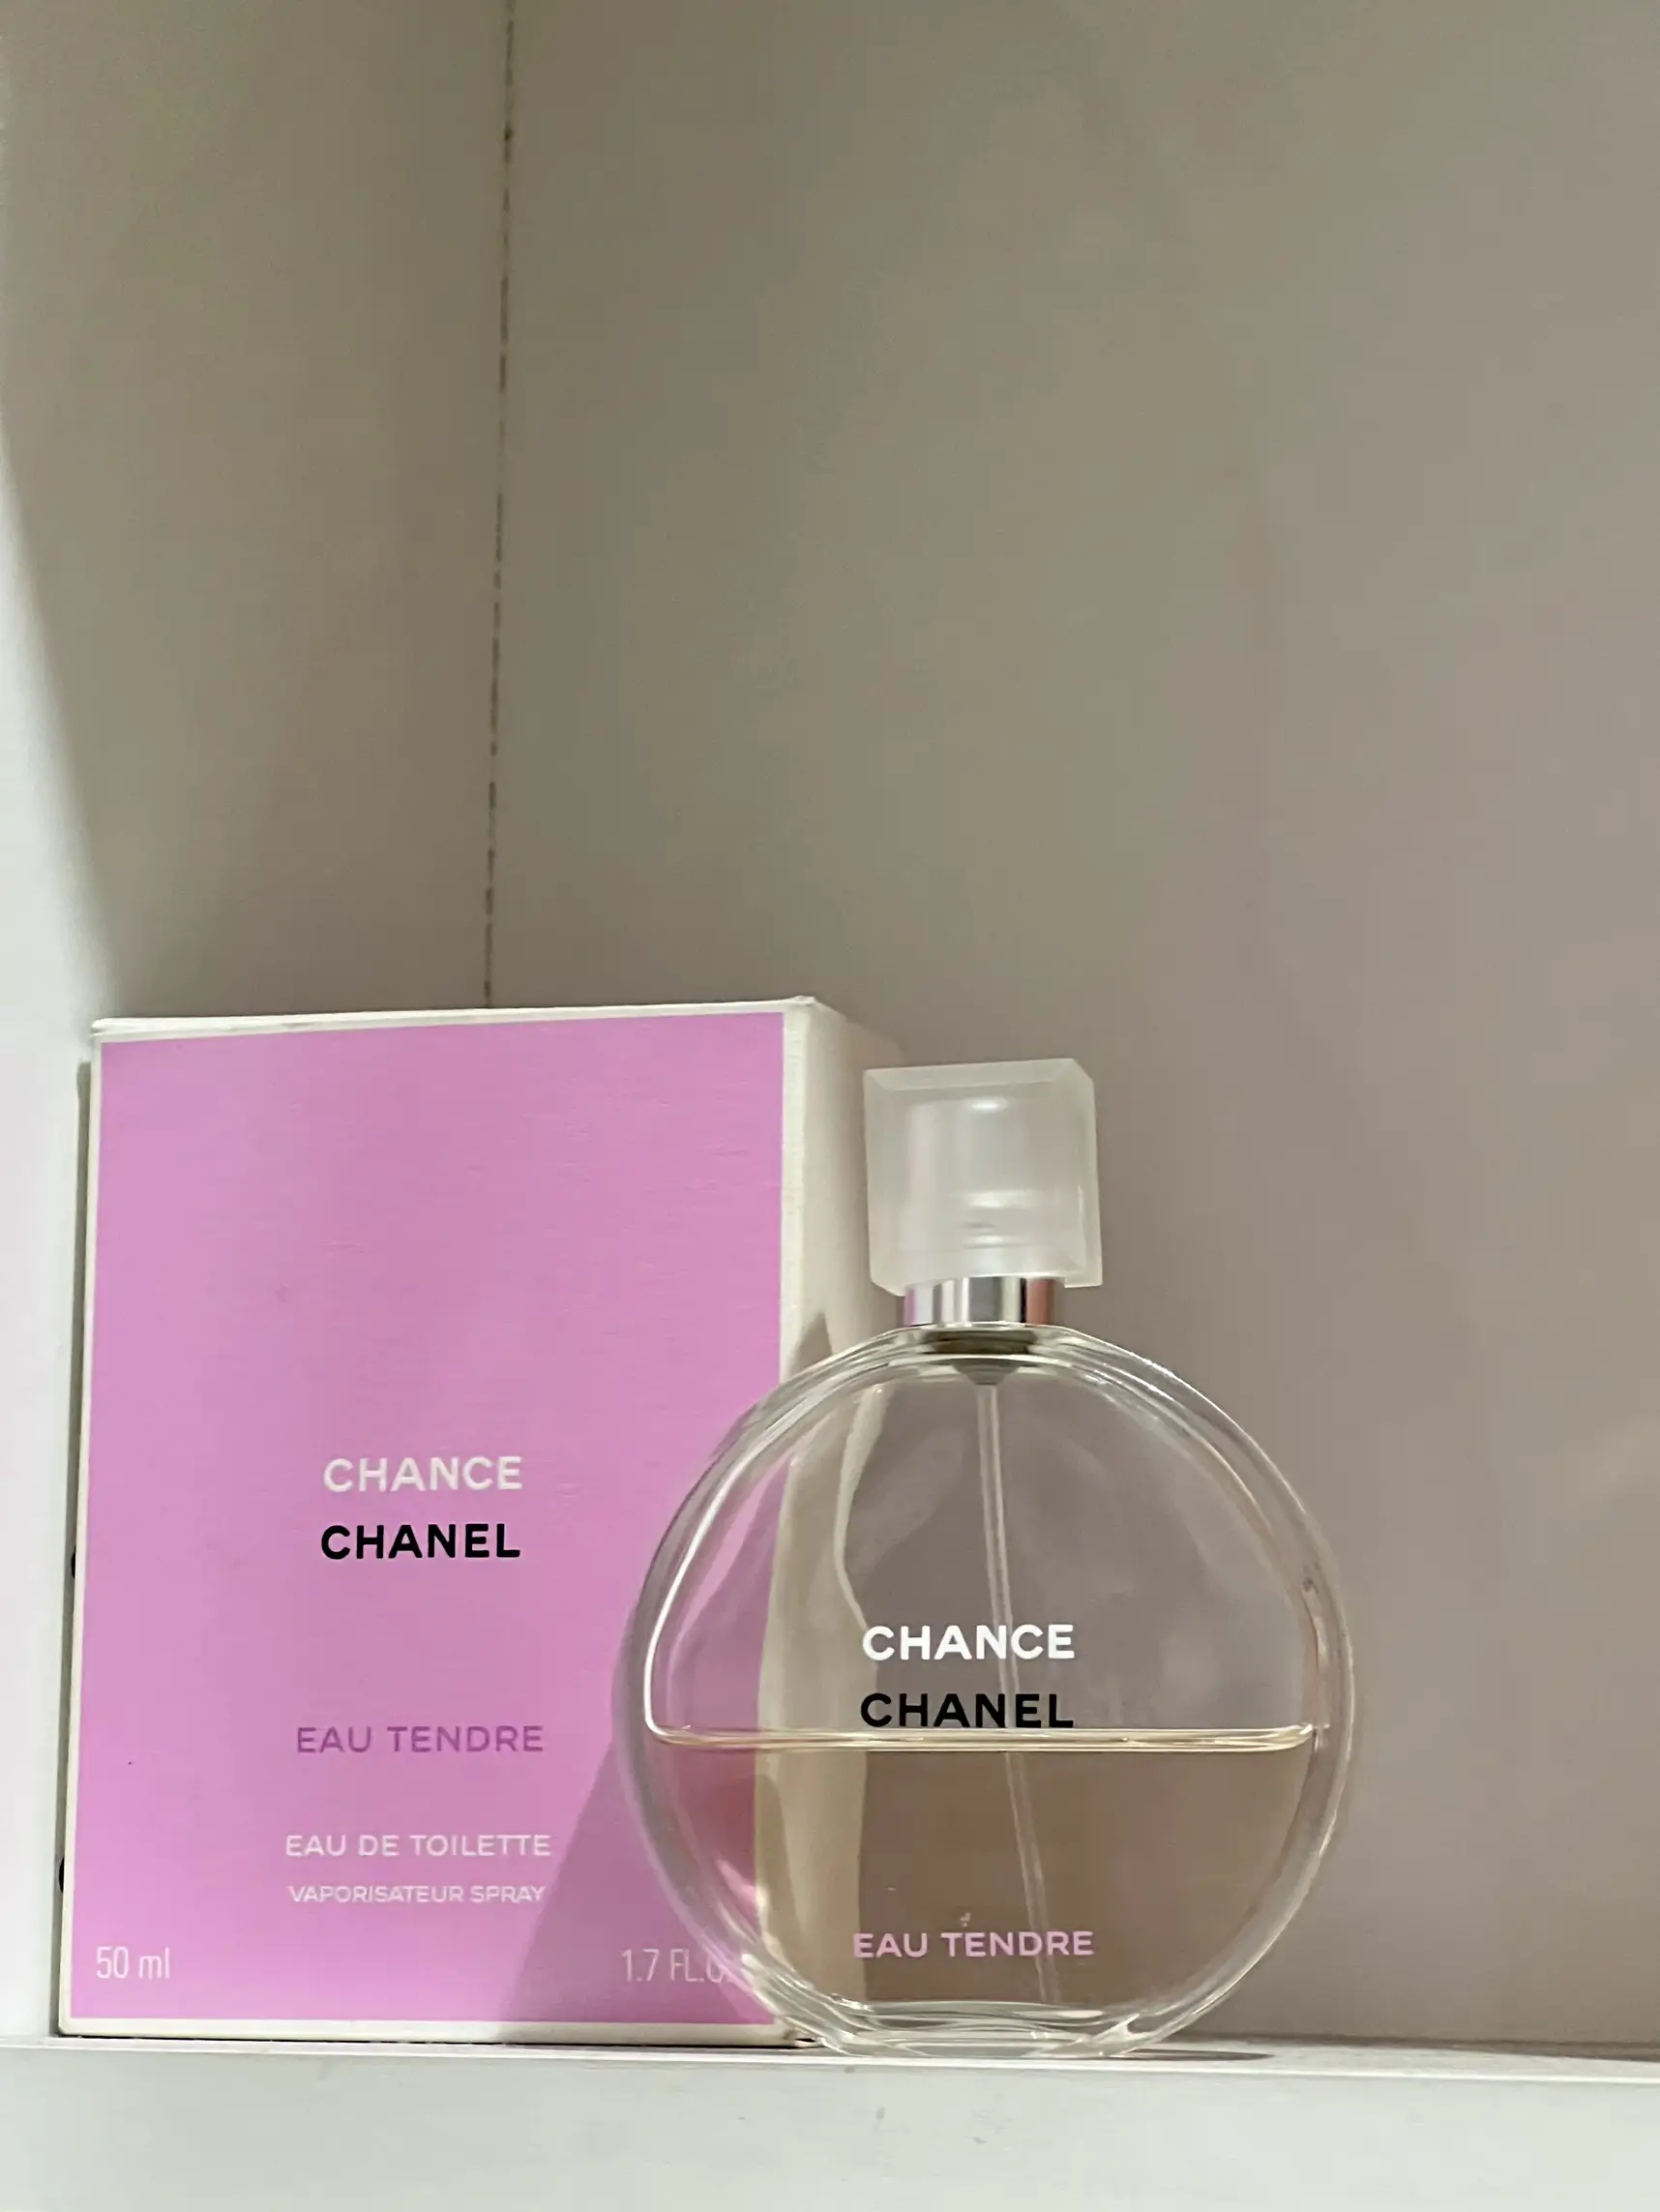 Review of Chanel Chance Eau Tendre💗, Gallery posted by nblnay